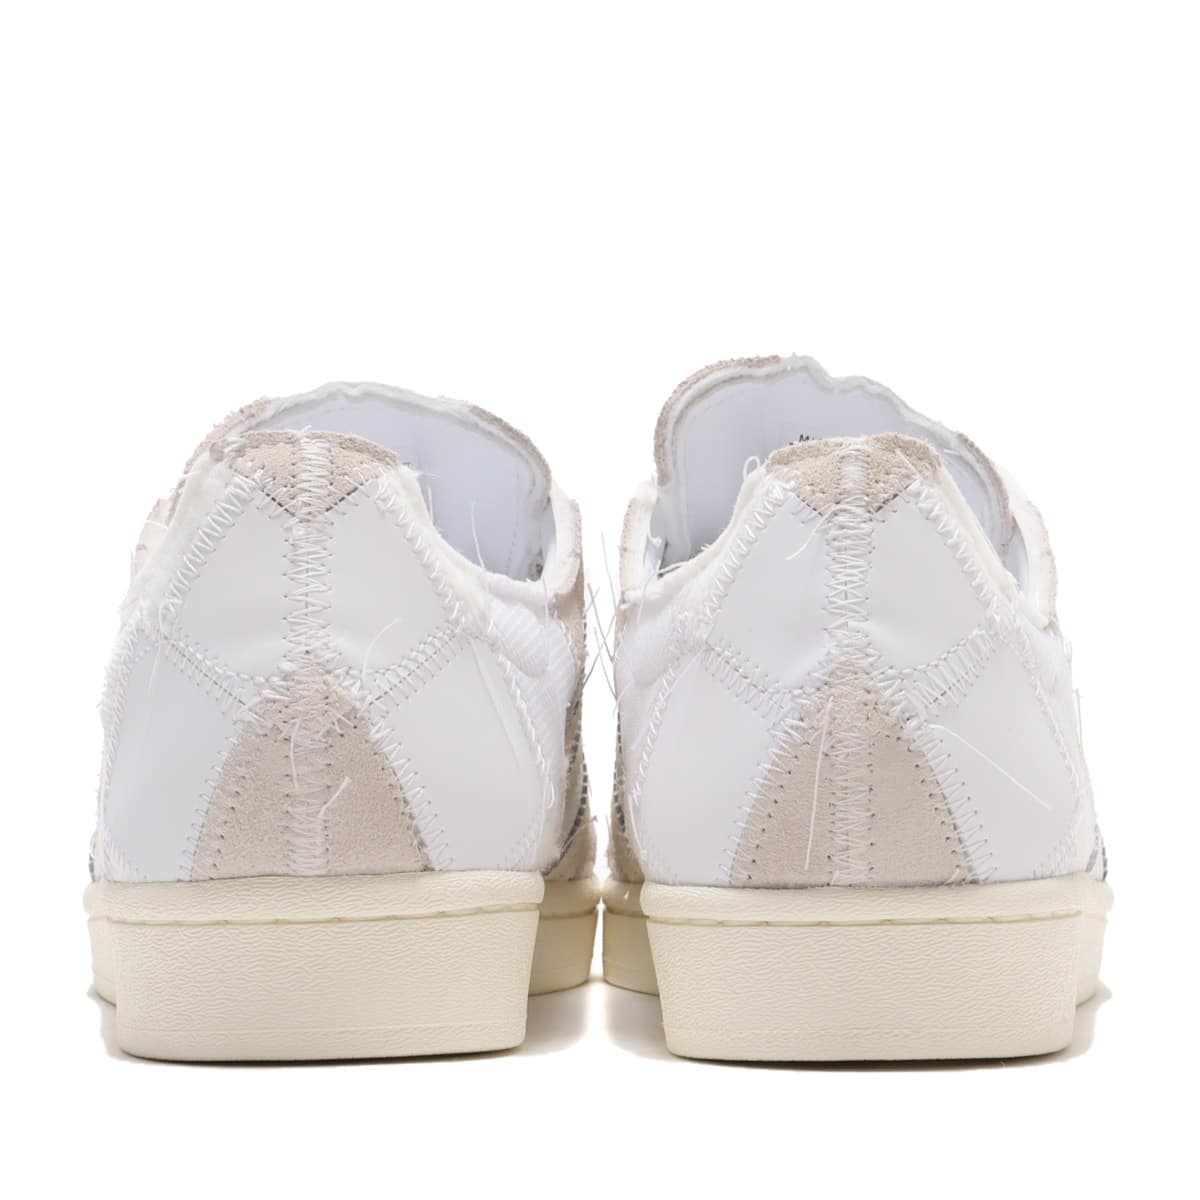 adidas SUPERSTAR ATMOS SH SUPPLIER COLOR/WHITE TINT /OFF WHITE 22SS-S